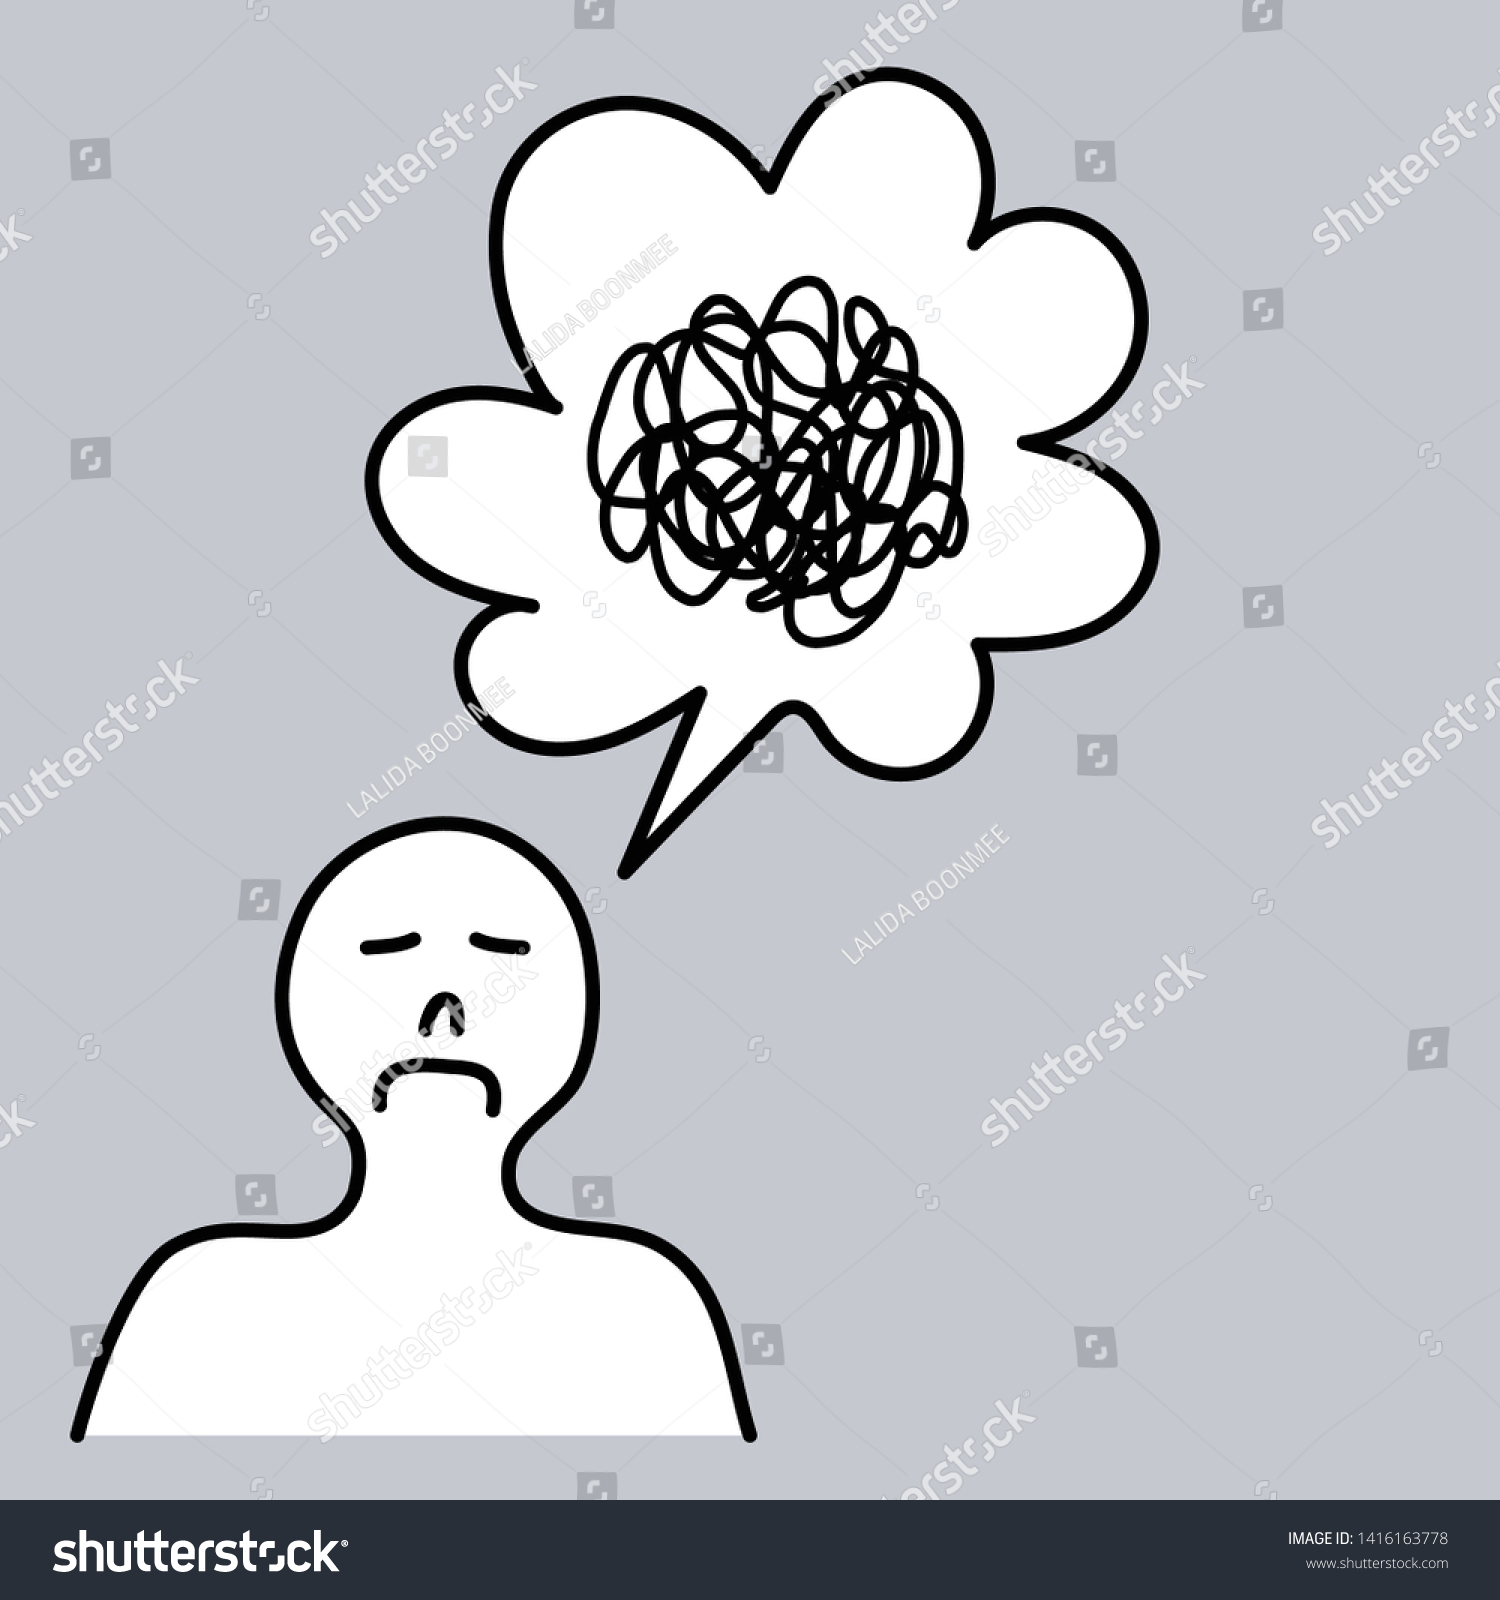 Person Sad Face Meander Line Speech Stock Vector (Royalty Free ...